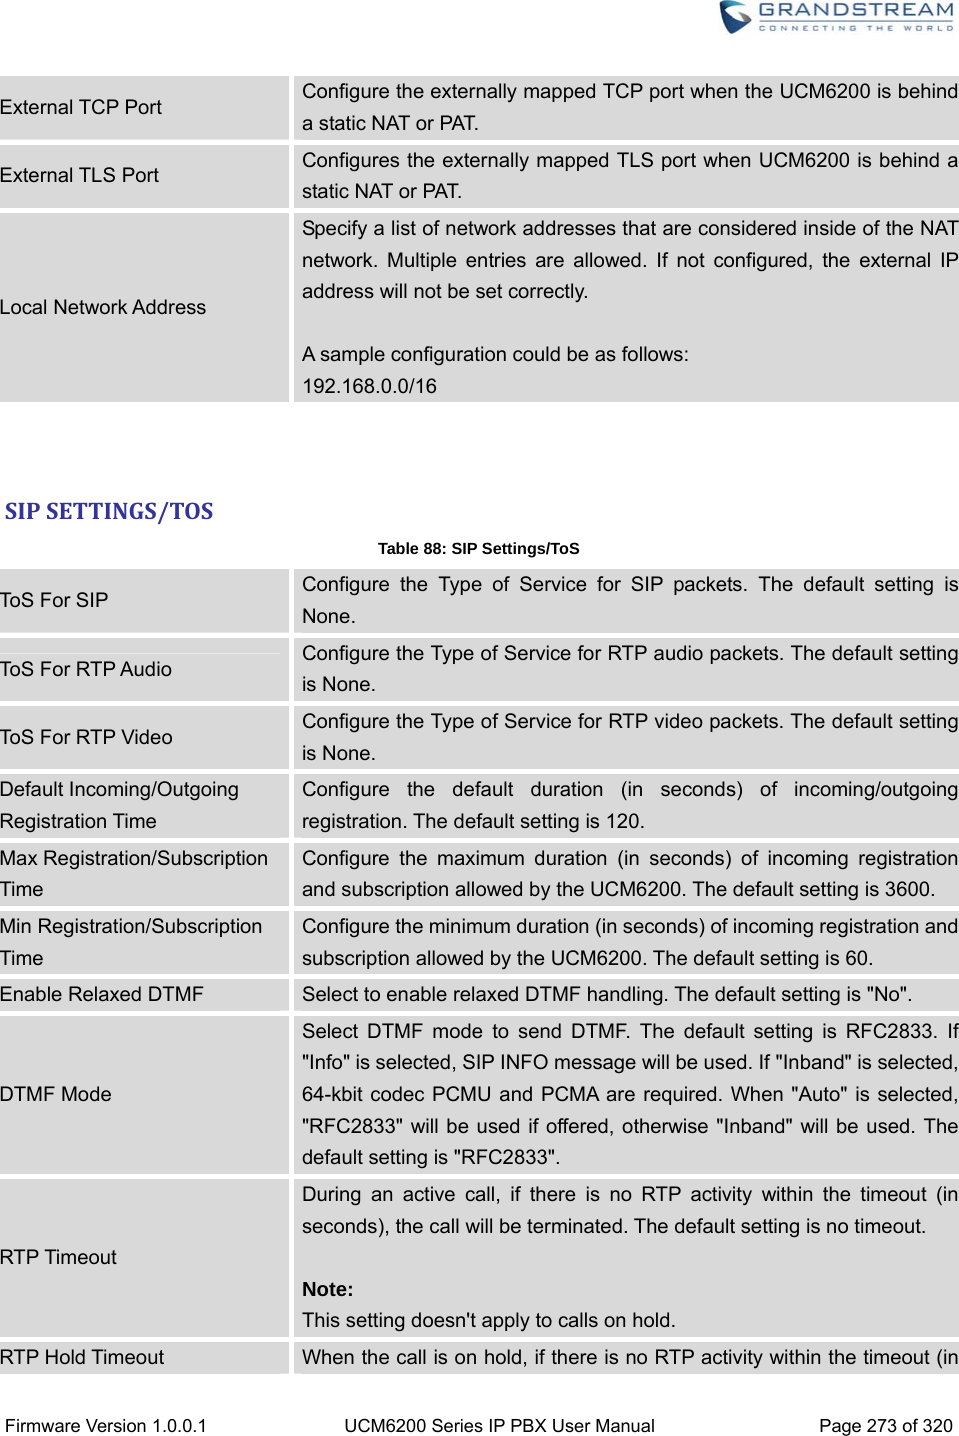  Firmware Version 1.0.0.1  UCM6200 Series IP PBX User Manual  Page 273 of 320 External TCP Port  Configure the externally mapped TCP port when the UCM6200 is behind a static NAT or PAT. External TLS Port  Configures the externally mapped TLS port when UCM6200 is behind a static NAT or PAT. Local Network Address Specify a list of network addresses that are considered inside of the NAT network. Multiple entries are allowed. If not configured, the external IP address will not be set correctly.  A sample configuration could be as follows: 192.168.0.0/16  SIPSETTINGS/TOSTable 88: SIP Settings/ToS ToS For SIP  Configure the Type of Service for SIP packets. The default setting is None. ToS For RTP Audio  Configure the Type of Service for RTP audio packets. The default setting is None. ToS For RTP Video  Configure the Type of Service for RTP video packets. The default setting is None. Default Incoming/Outgoing Registration Time Configure the default duration (in seconds) of incoming/outgoing registration. The default setting is 120. Max Registration/Subscription Time Configure the maximum duration (in seconds) of incoming registration and subscription allowed by the UCM6200. The default setting is 3600. Min Registration/Subscription Time Configure the minimum duration (in seconds) of incoming registration and subscription allowed by the UCM6200. The default setting is 60. Enable Relaxed DTMF  Select to enable relaxed DTMF handling. The default setting is &quot;No&quot;. DTMF Mode Select DTMF mode to send DTMF. The default setting is RFC2833. If &quot;Info&quot; is selected, SIP INFO message will be used. If &quot;Inband&quot; is selected, 64-kbit codec PCMU and PCMA are required. When &quot;Auto&quot; is selected, &quot;RFC2833&quot; will be used if offered, otherwise &quot;Inband&quot; will be used. The default setting is &quot;RFC2833&quot;. RTP Timeout During an active call, if there is no RTP activity within the timeout (in seconds), the call will be terminated. The default setting is no timeout.    Note: This setting doesn&apos;t apply to calls on hold. RTP Hold Timeout  When the call is on hold, if there is no RTP activity within the timeout (in 